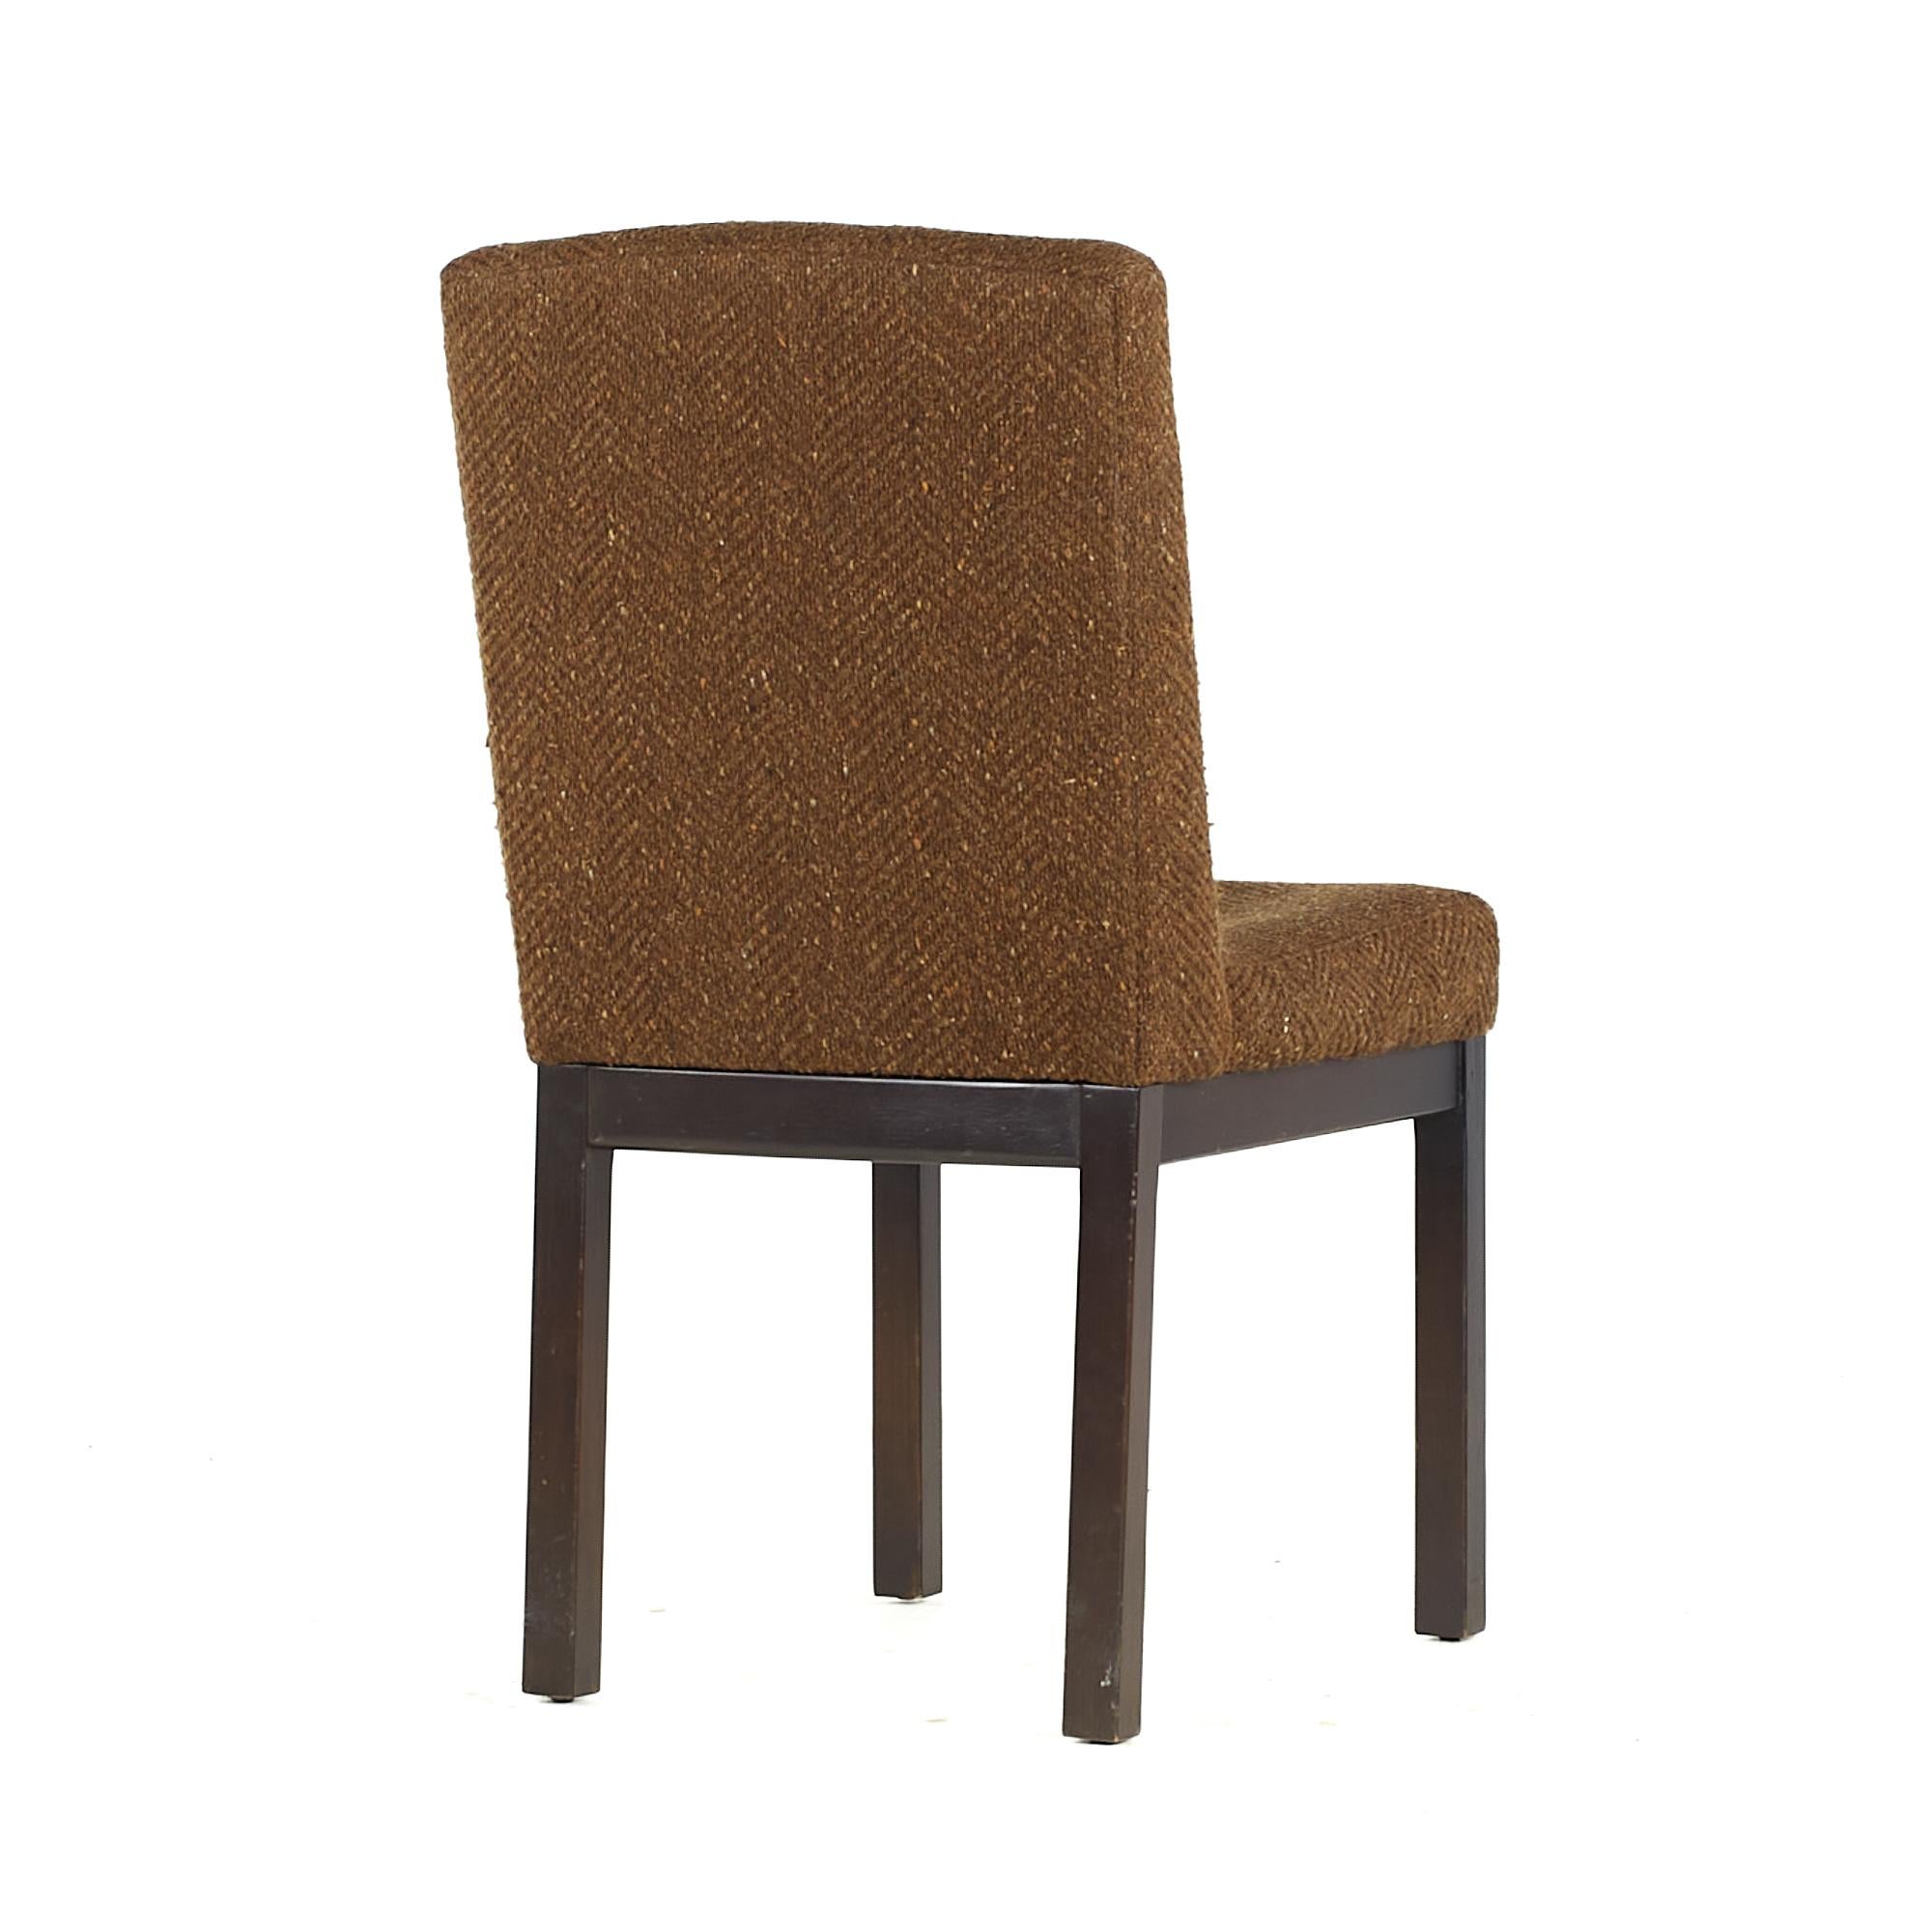 Upholstery Paul Evans Style Mid Century Dining Chairs - Set of 4 For Sale